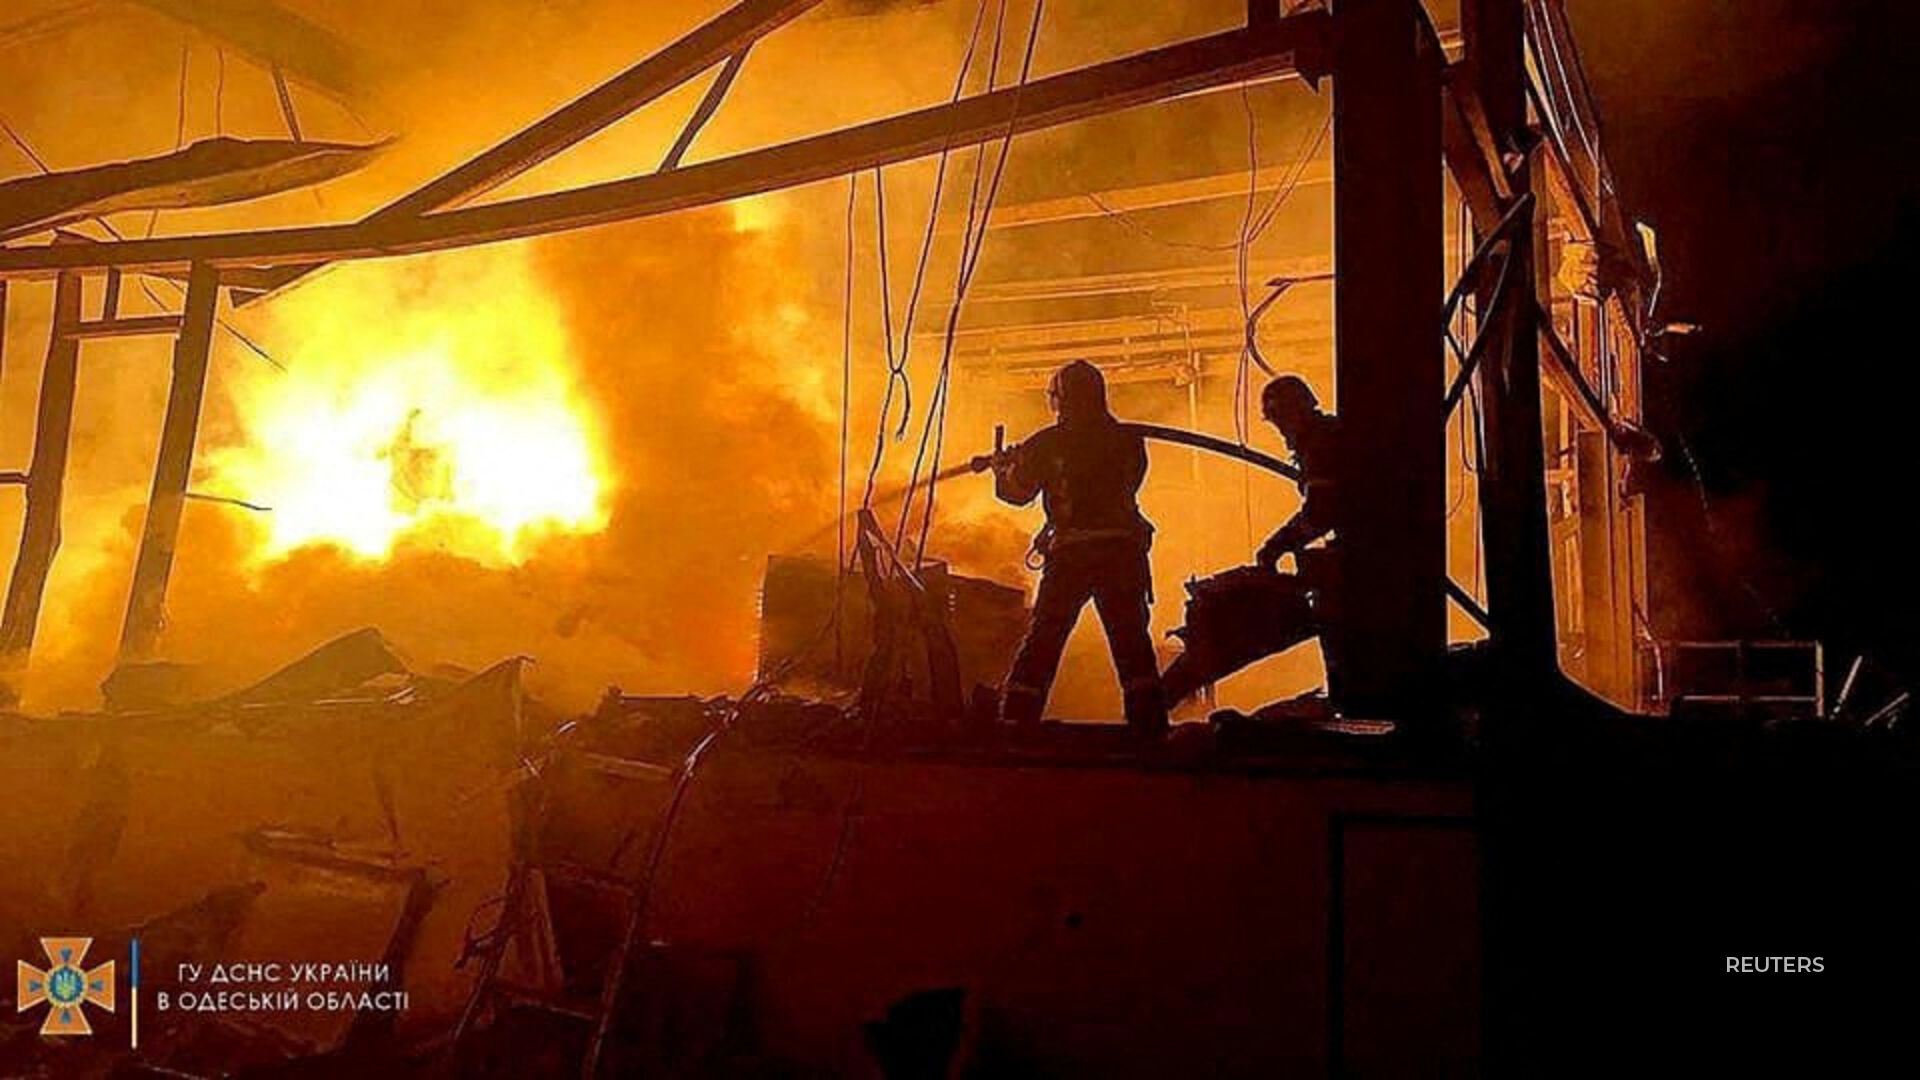 Russia launched an attack on the largest port in Ukraine.